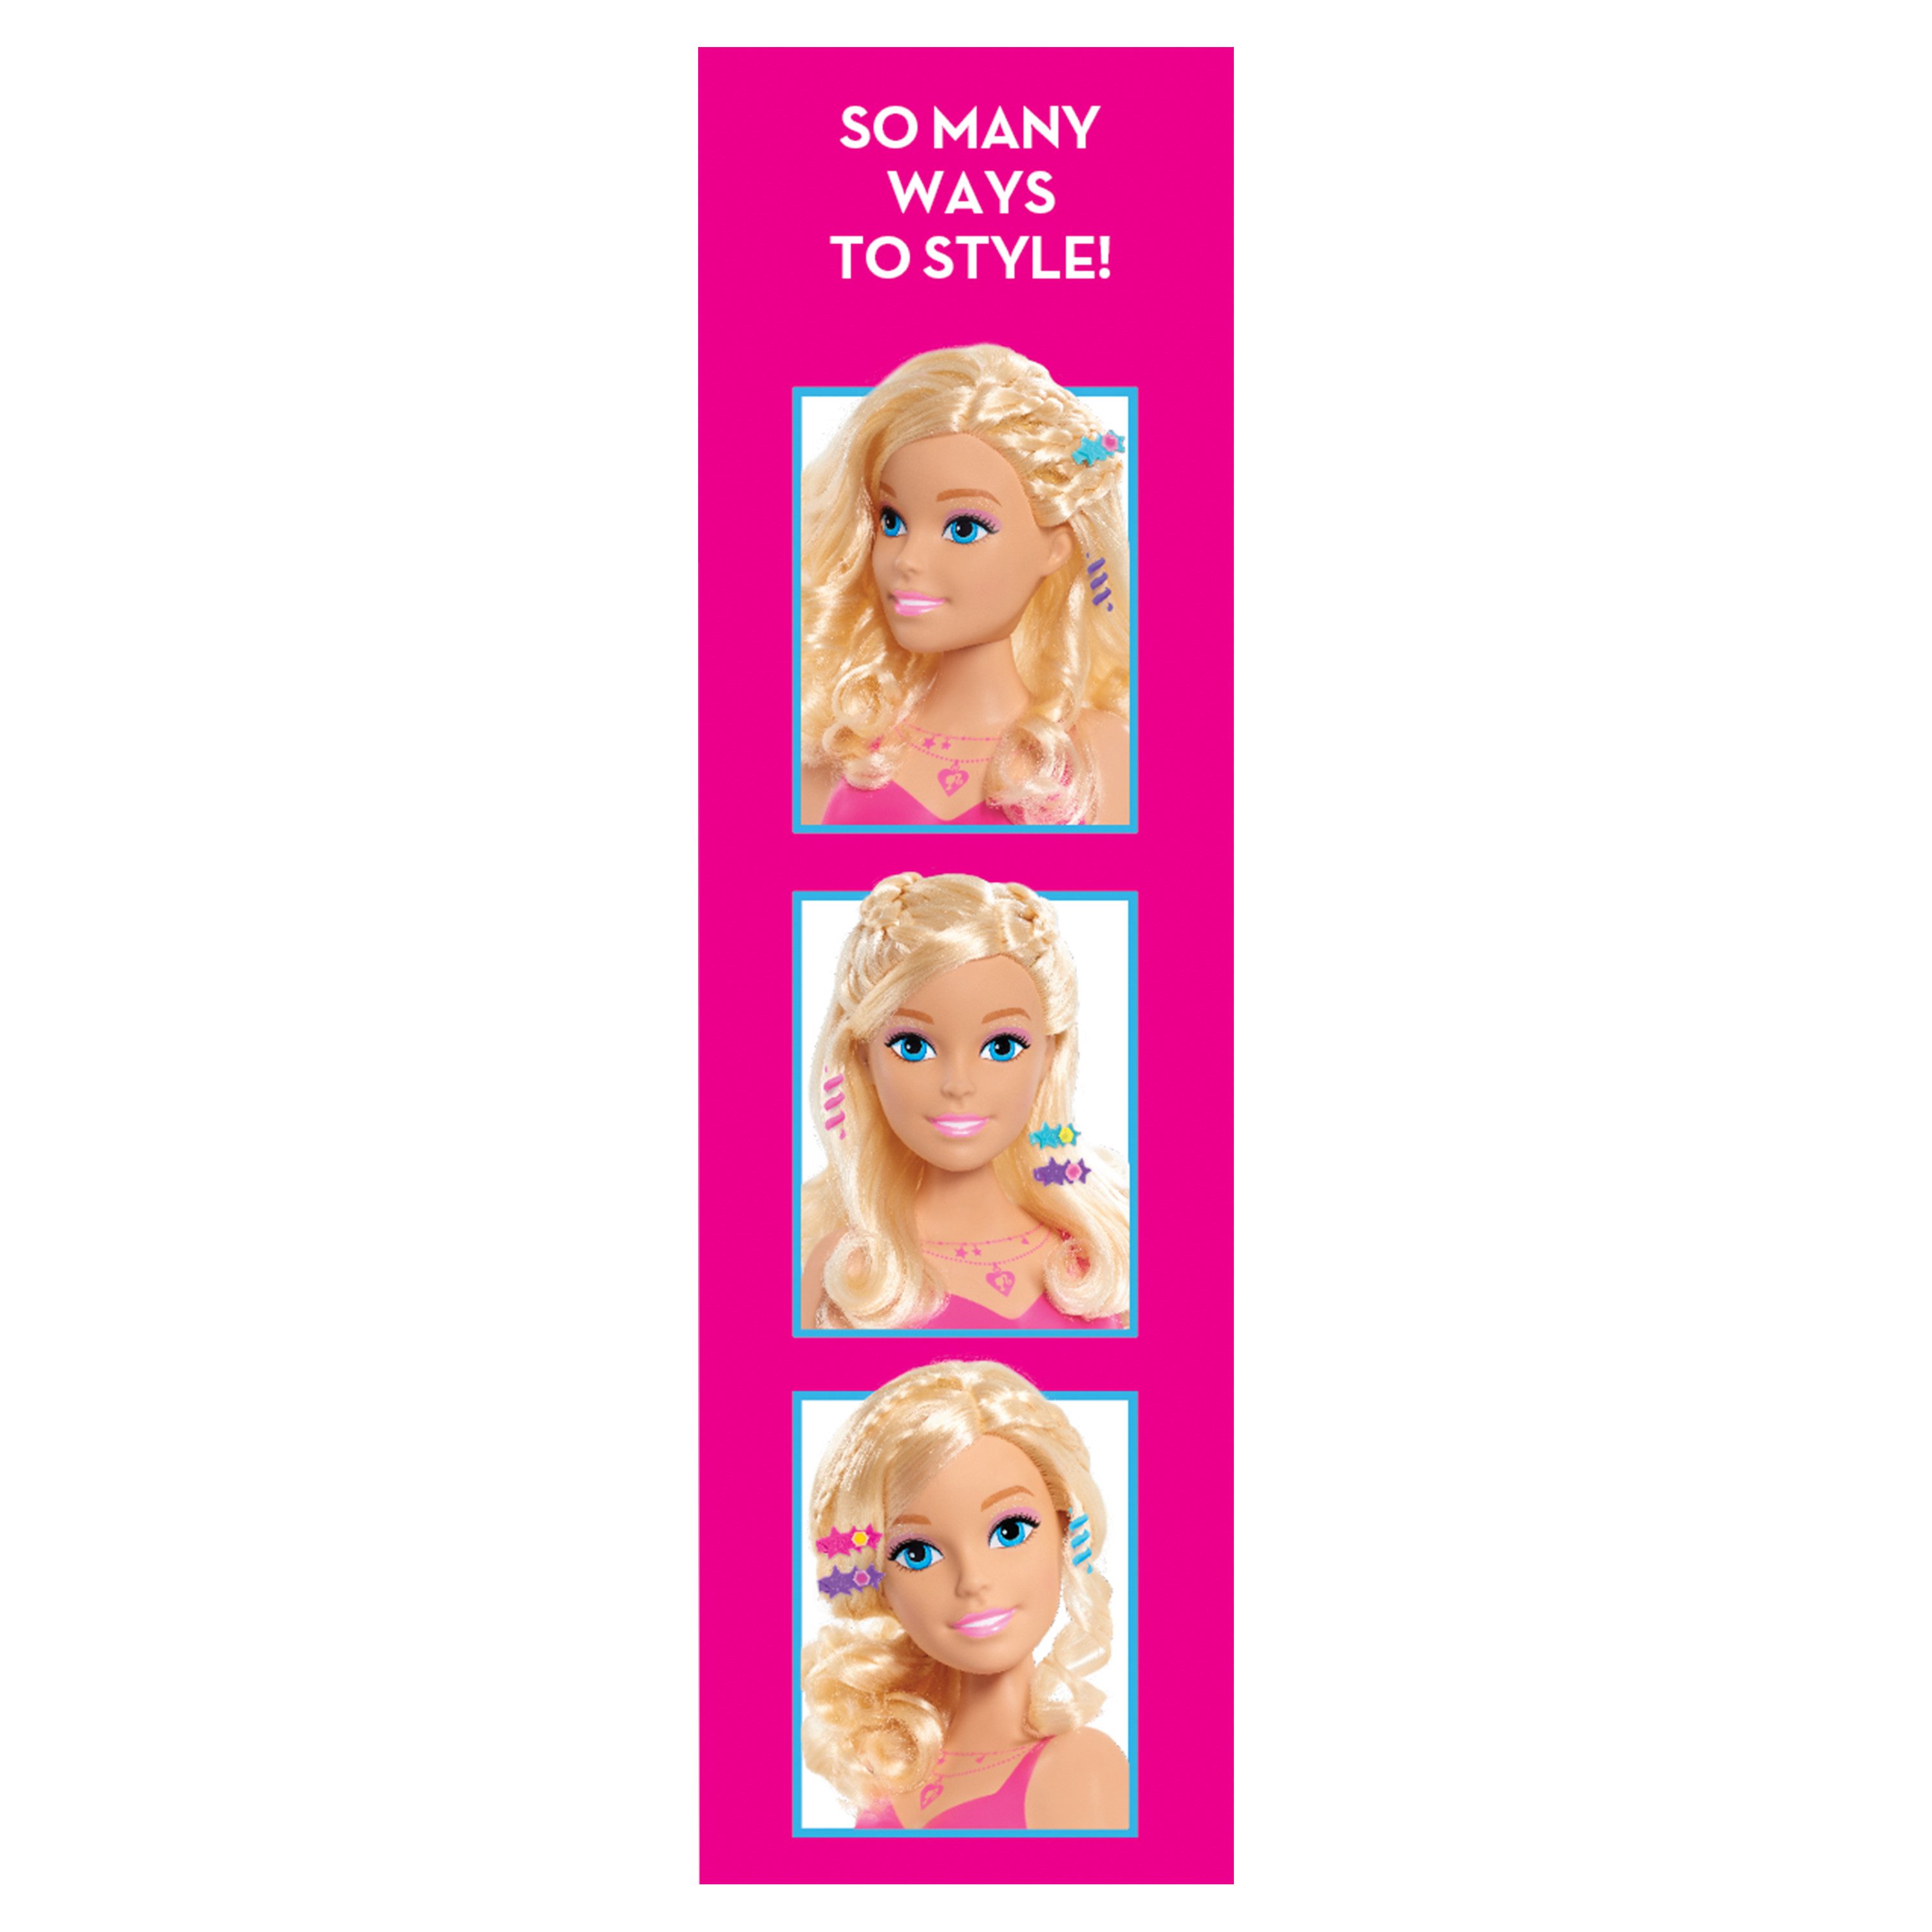 Just Play Barbie Fashionistas 20 Piece Styling Head for Kids, Blonde Hair, Preschool Ages 3 up - image 4 of 6